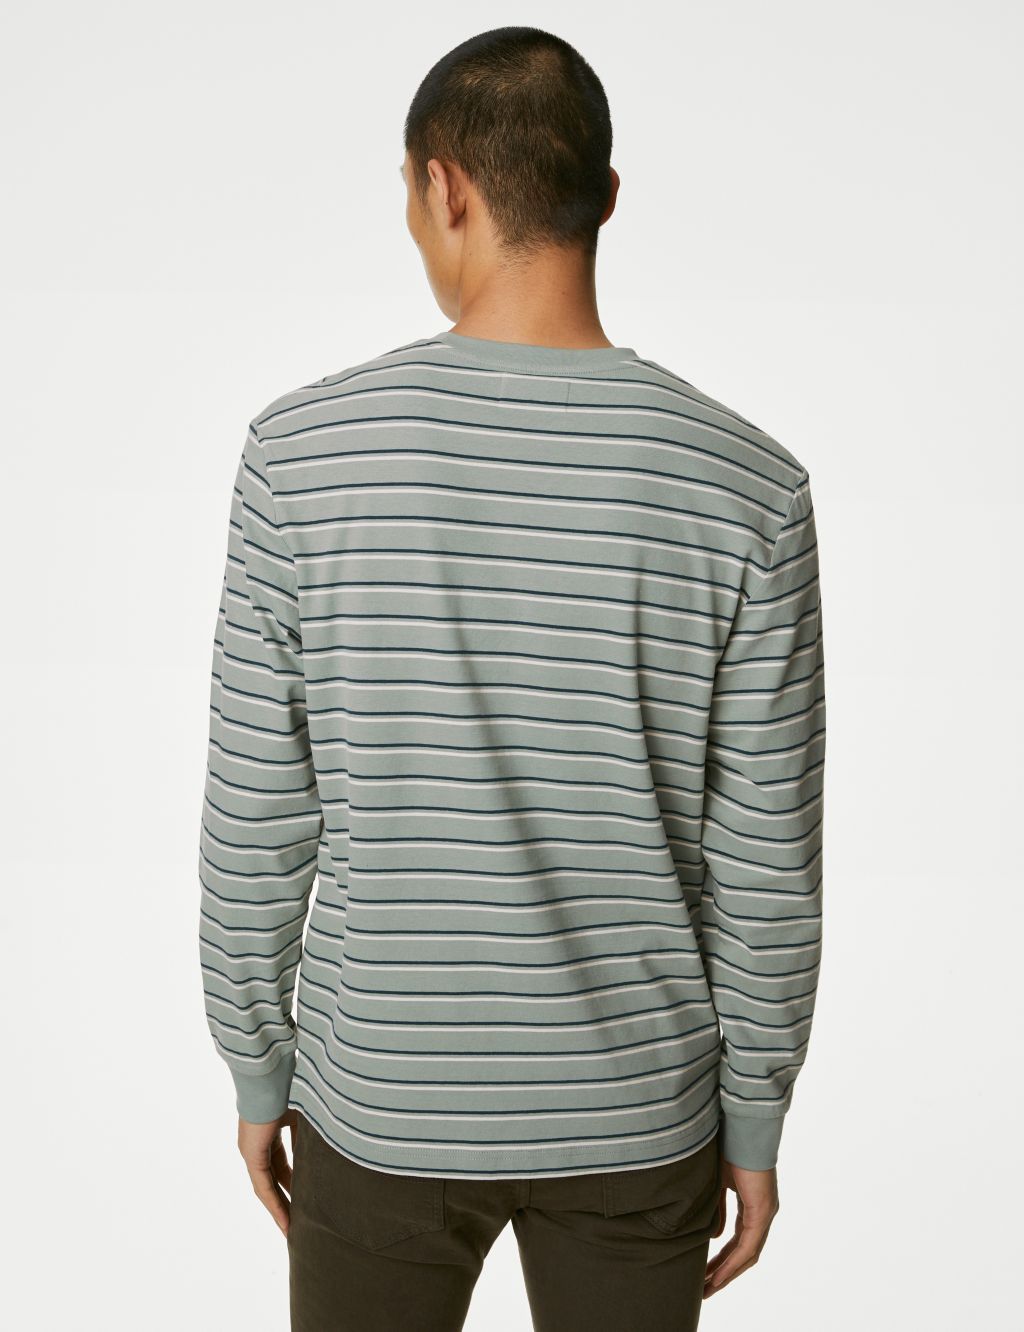 Pure Cotton Striped Long Sleeve T-Shirt image 5